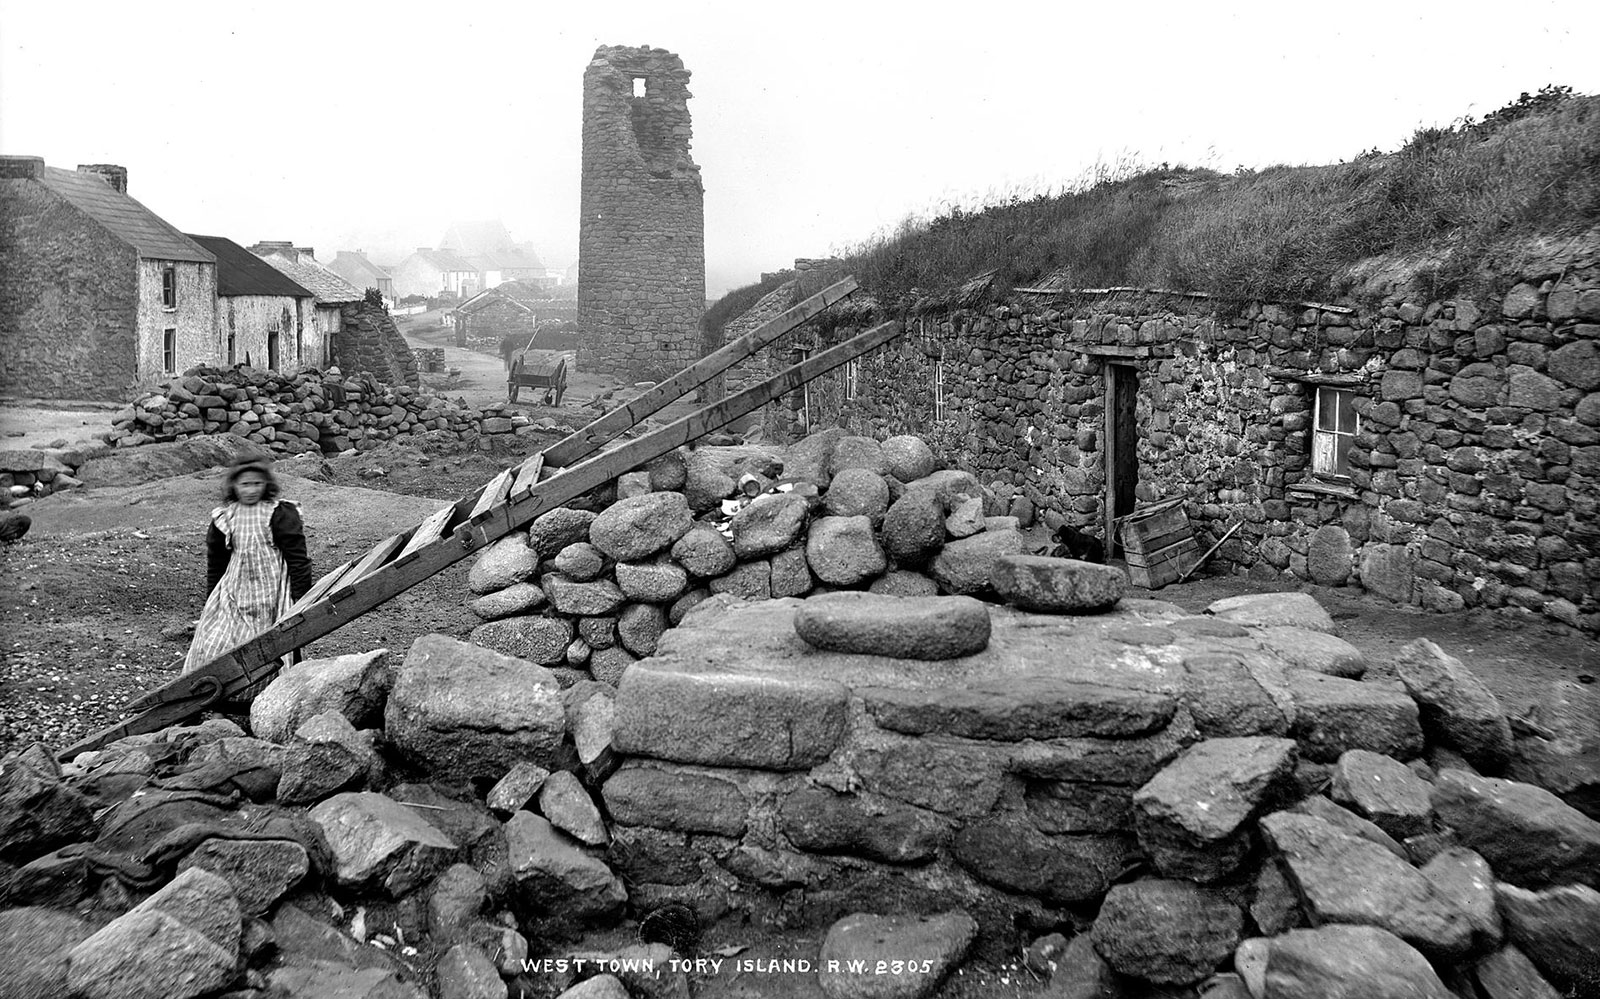 West Town on Tory Island, photographed by Robert Welch.